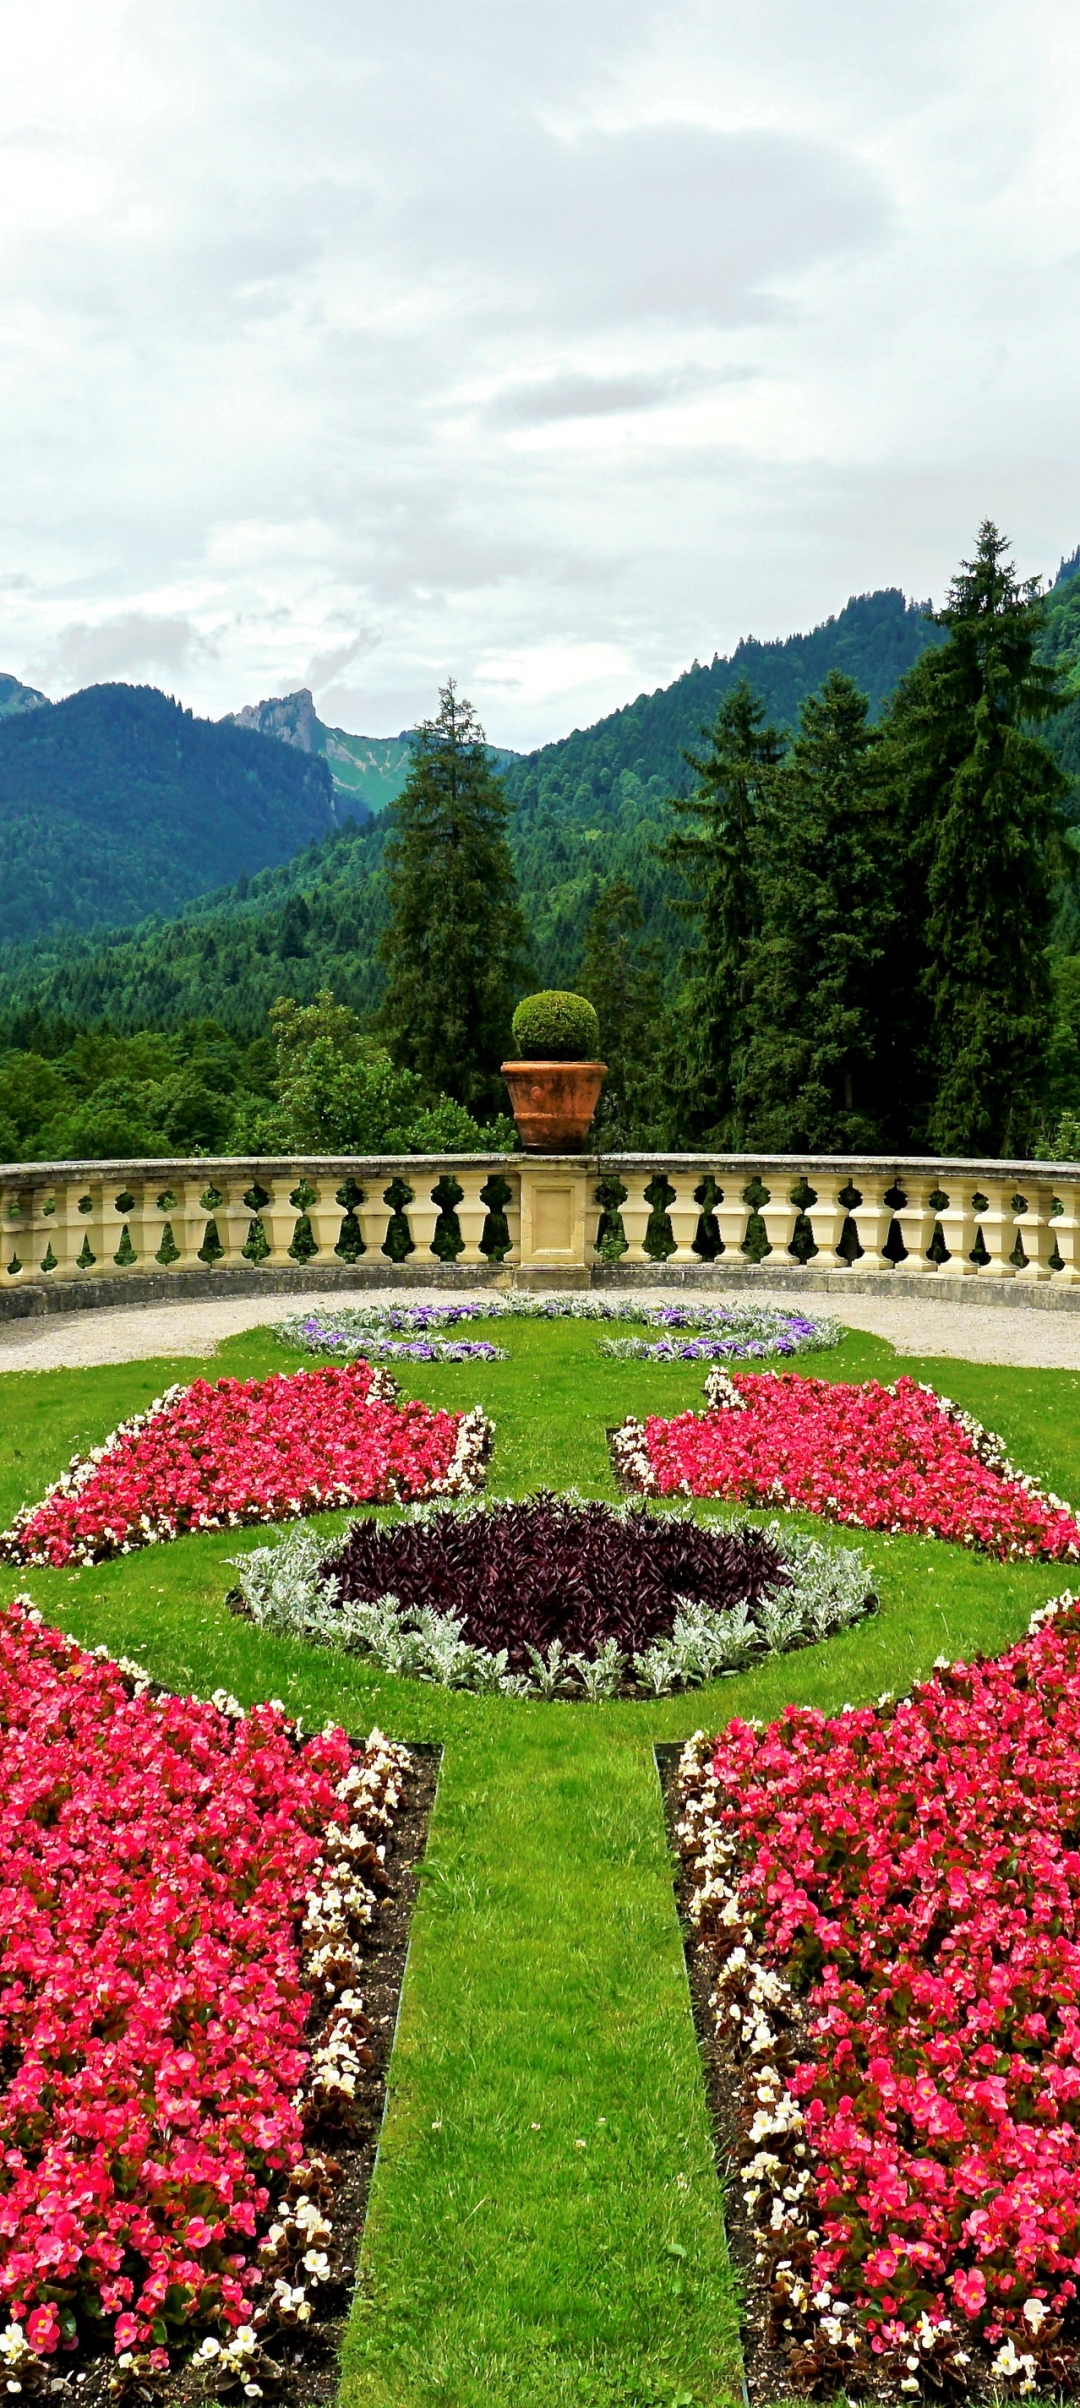 Courtyard of Linderhof Palace in Germany